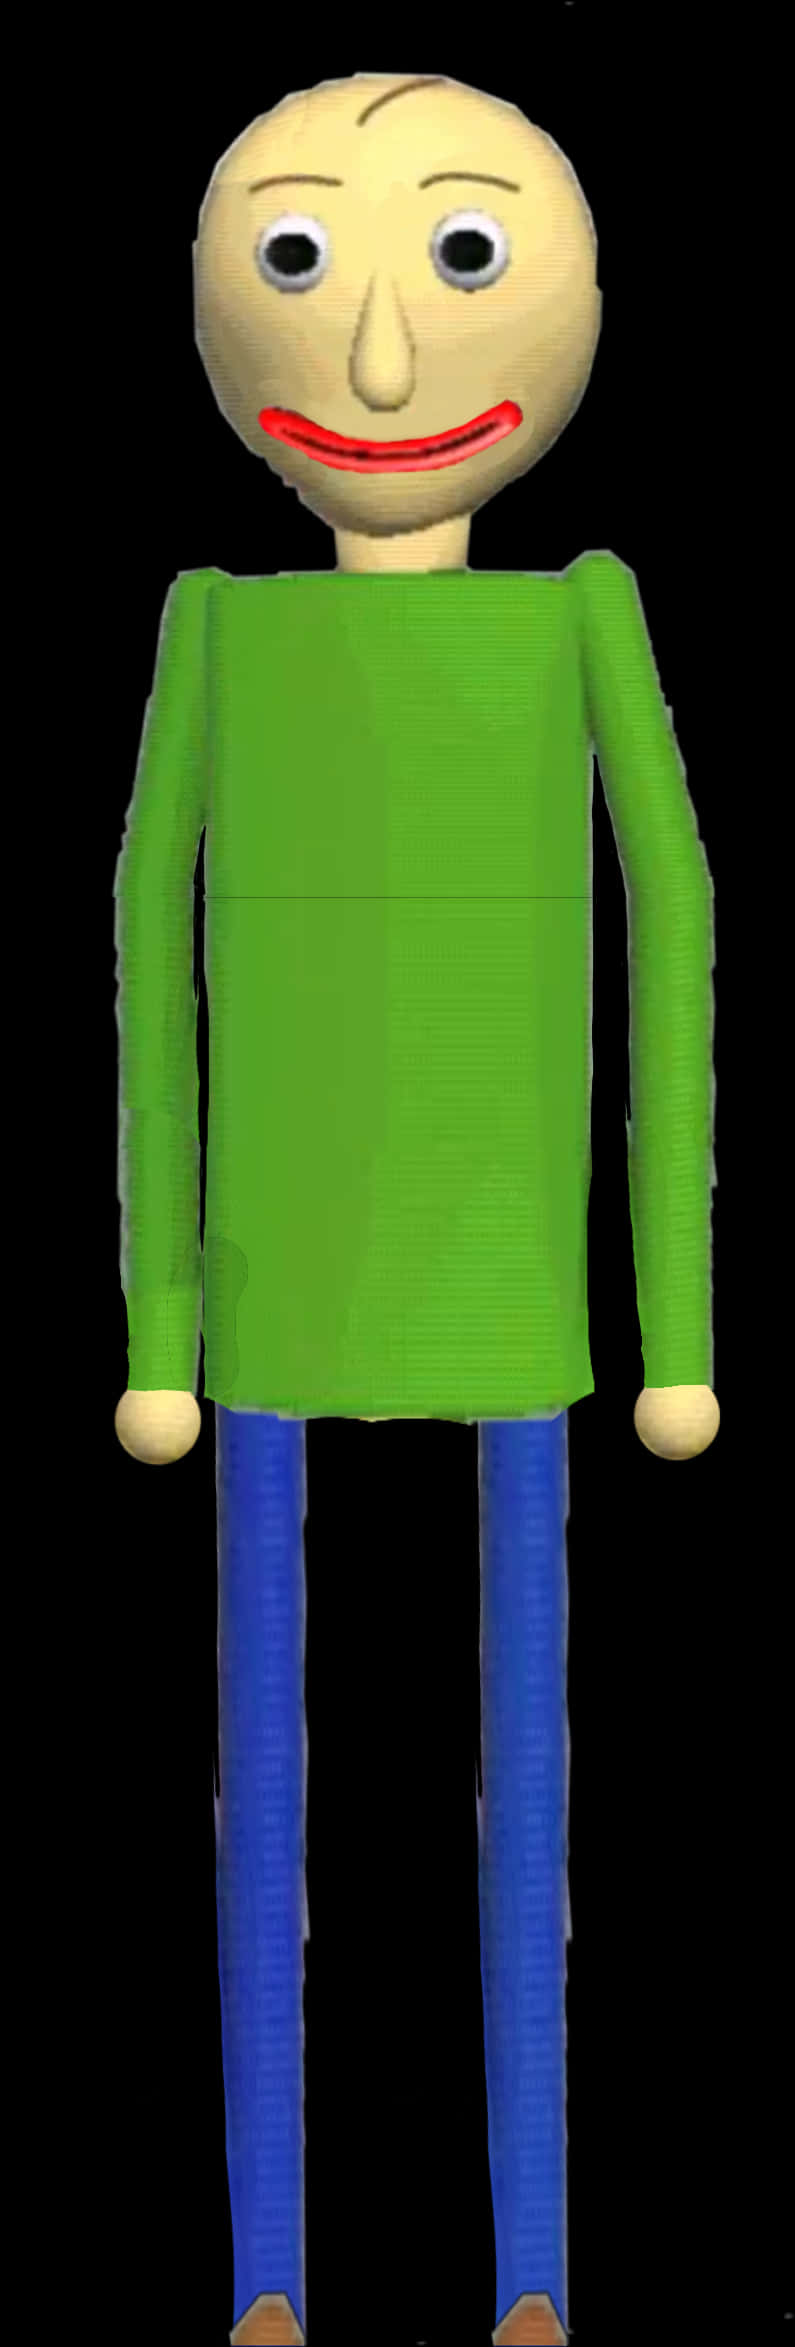 A Green And Blue Doll